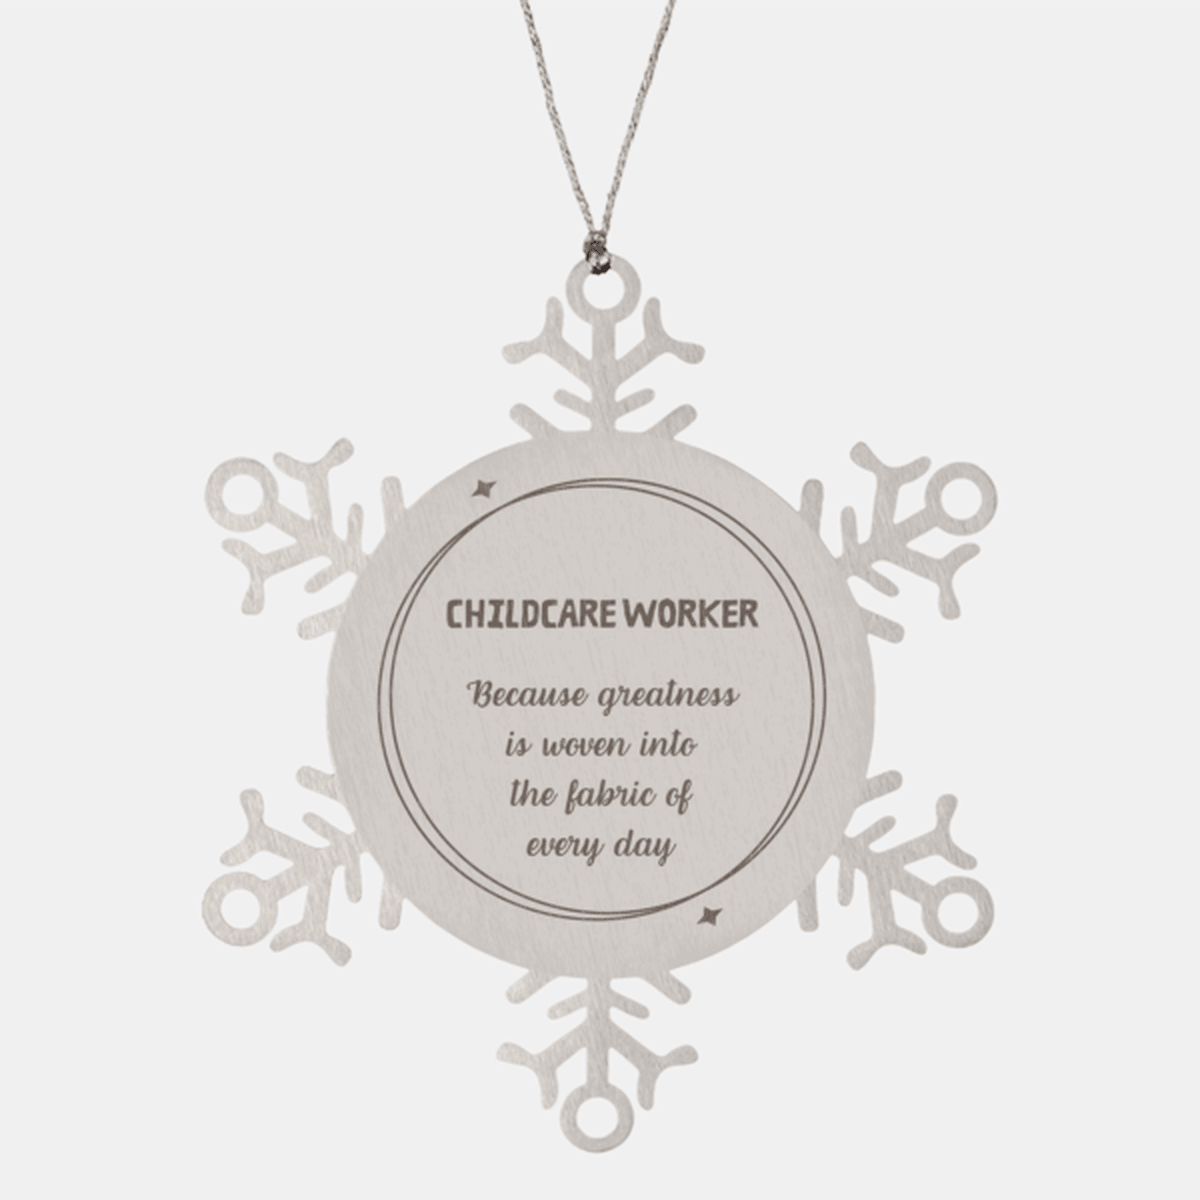 Sarcastic Childcare Worker Snowflake Ornament Gifts, Christmas Holiday Gifts for Childcare Worker Ornament, Childcare Worker: Because greatness is woven into the fabric of every day, Coworkers, Friends - Mallard Moon Gift Shop